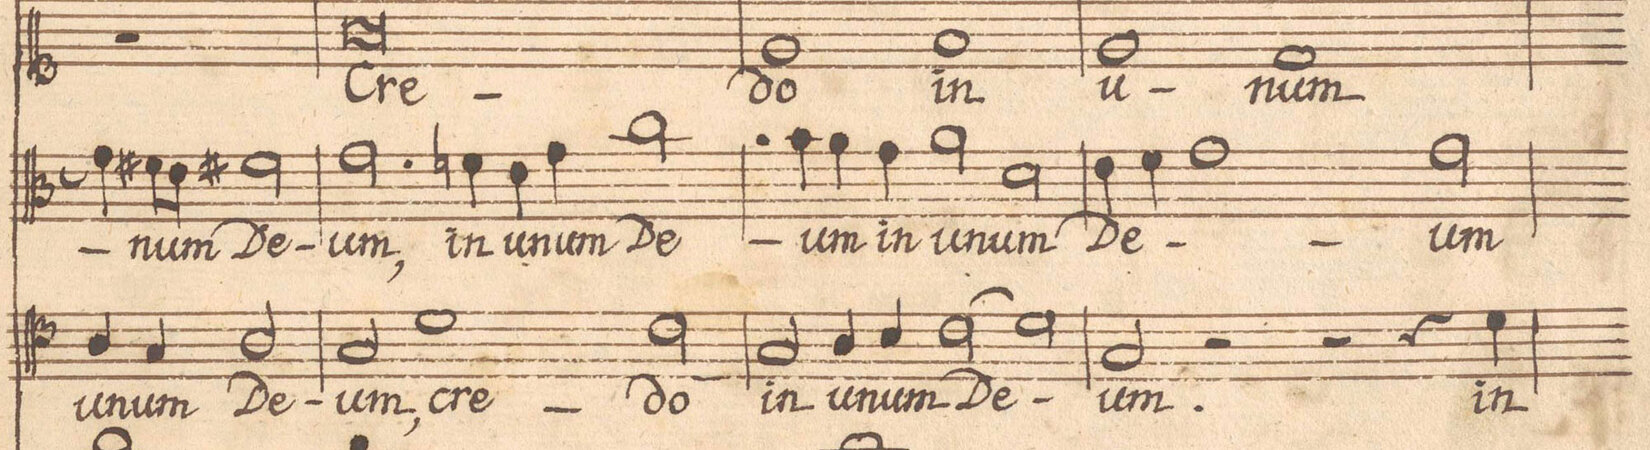 Cataloguing the music manuscripts of the Gotha Research Library